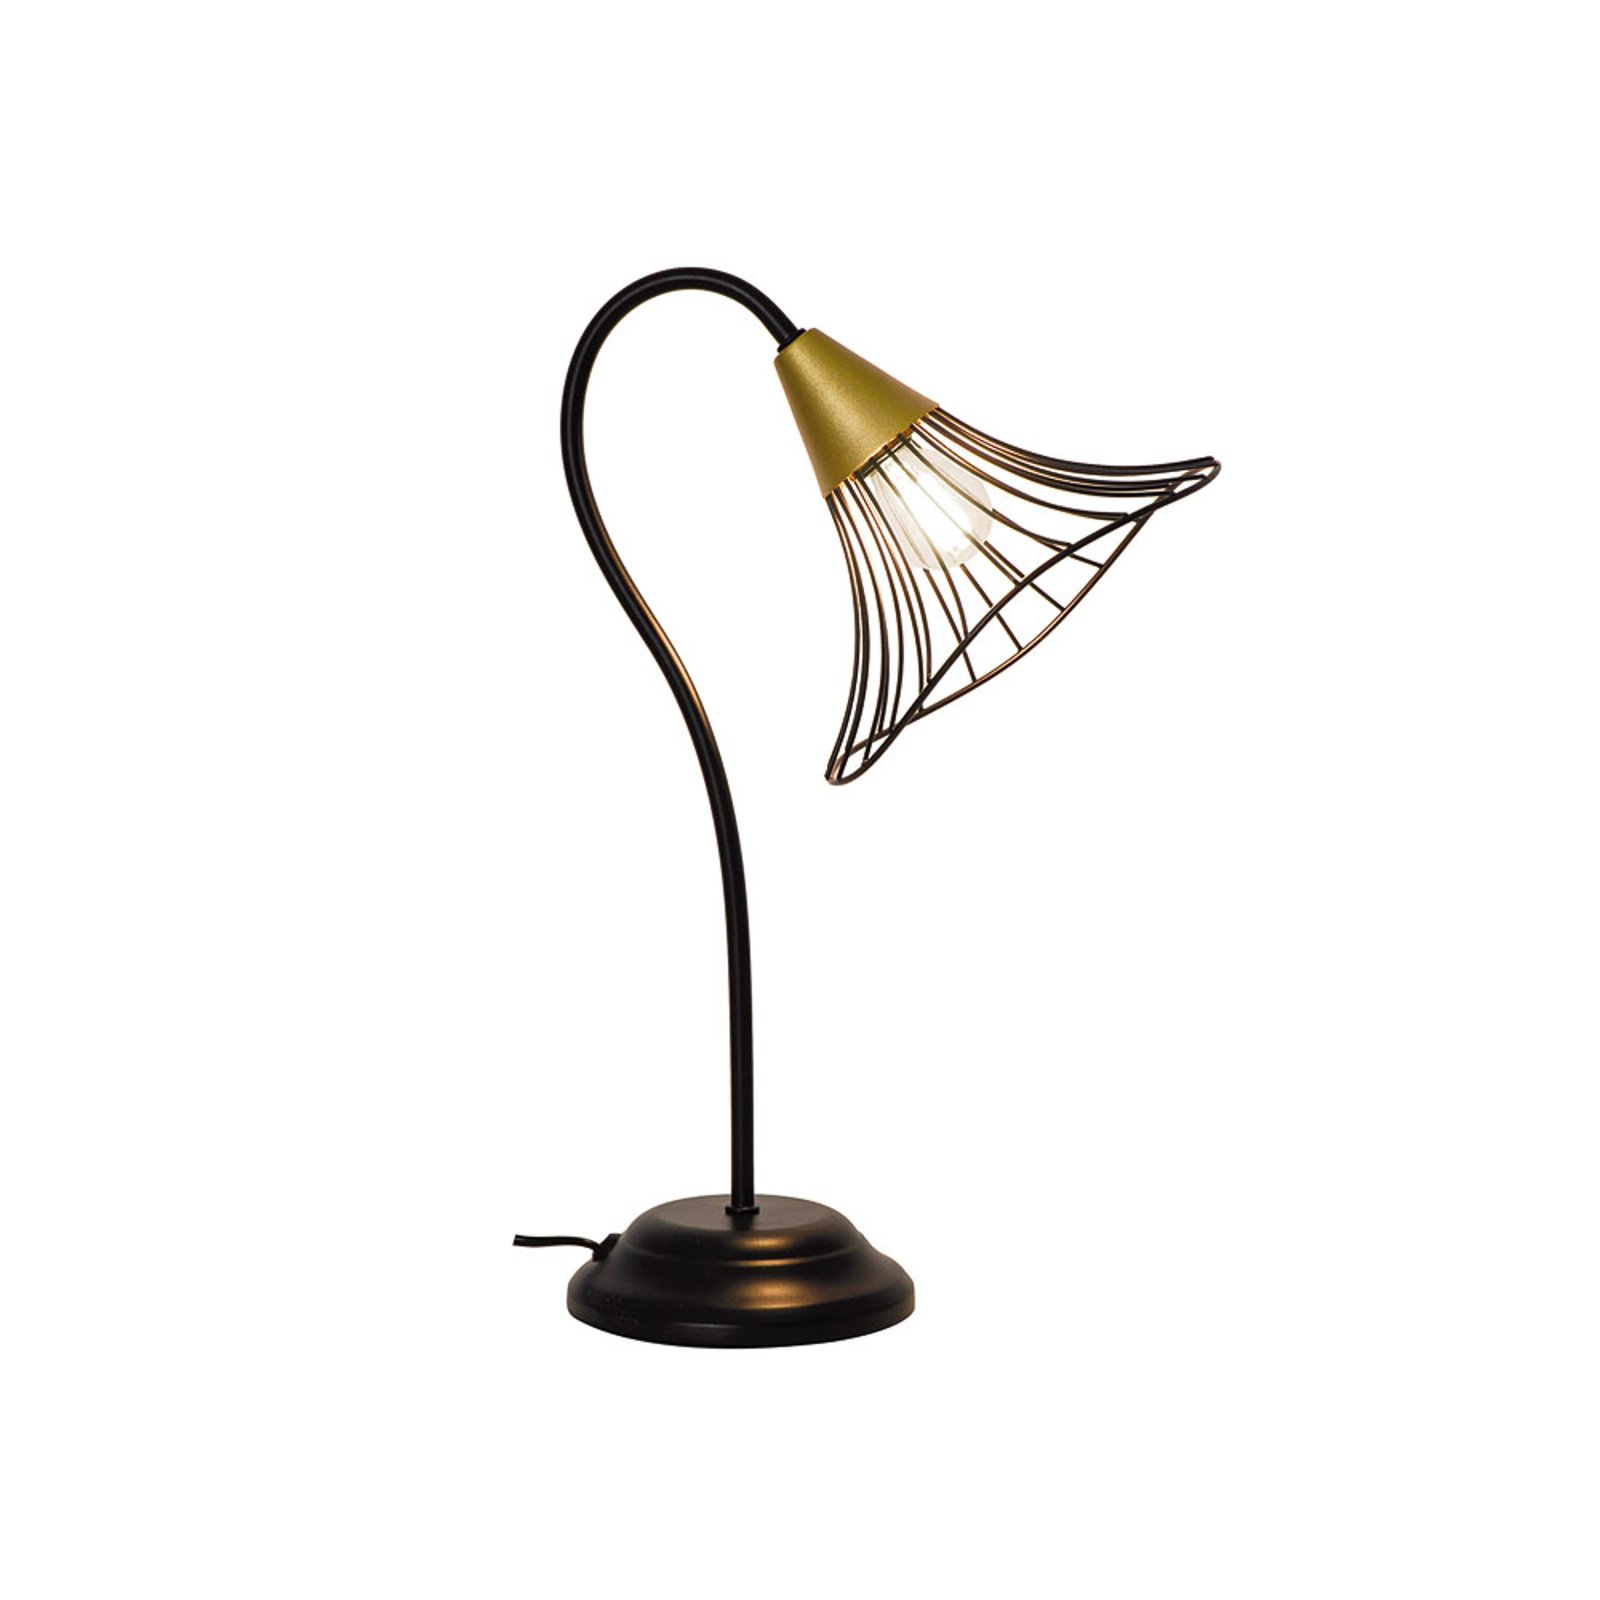 Tina table lamp with a cage lampshade